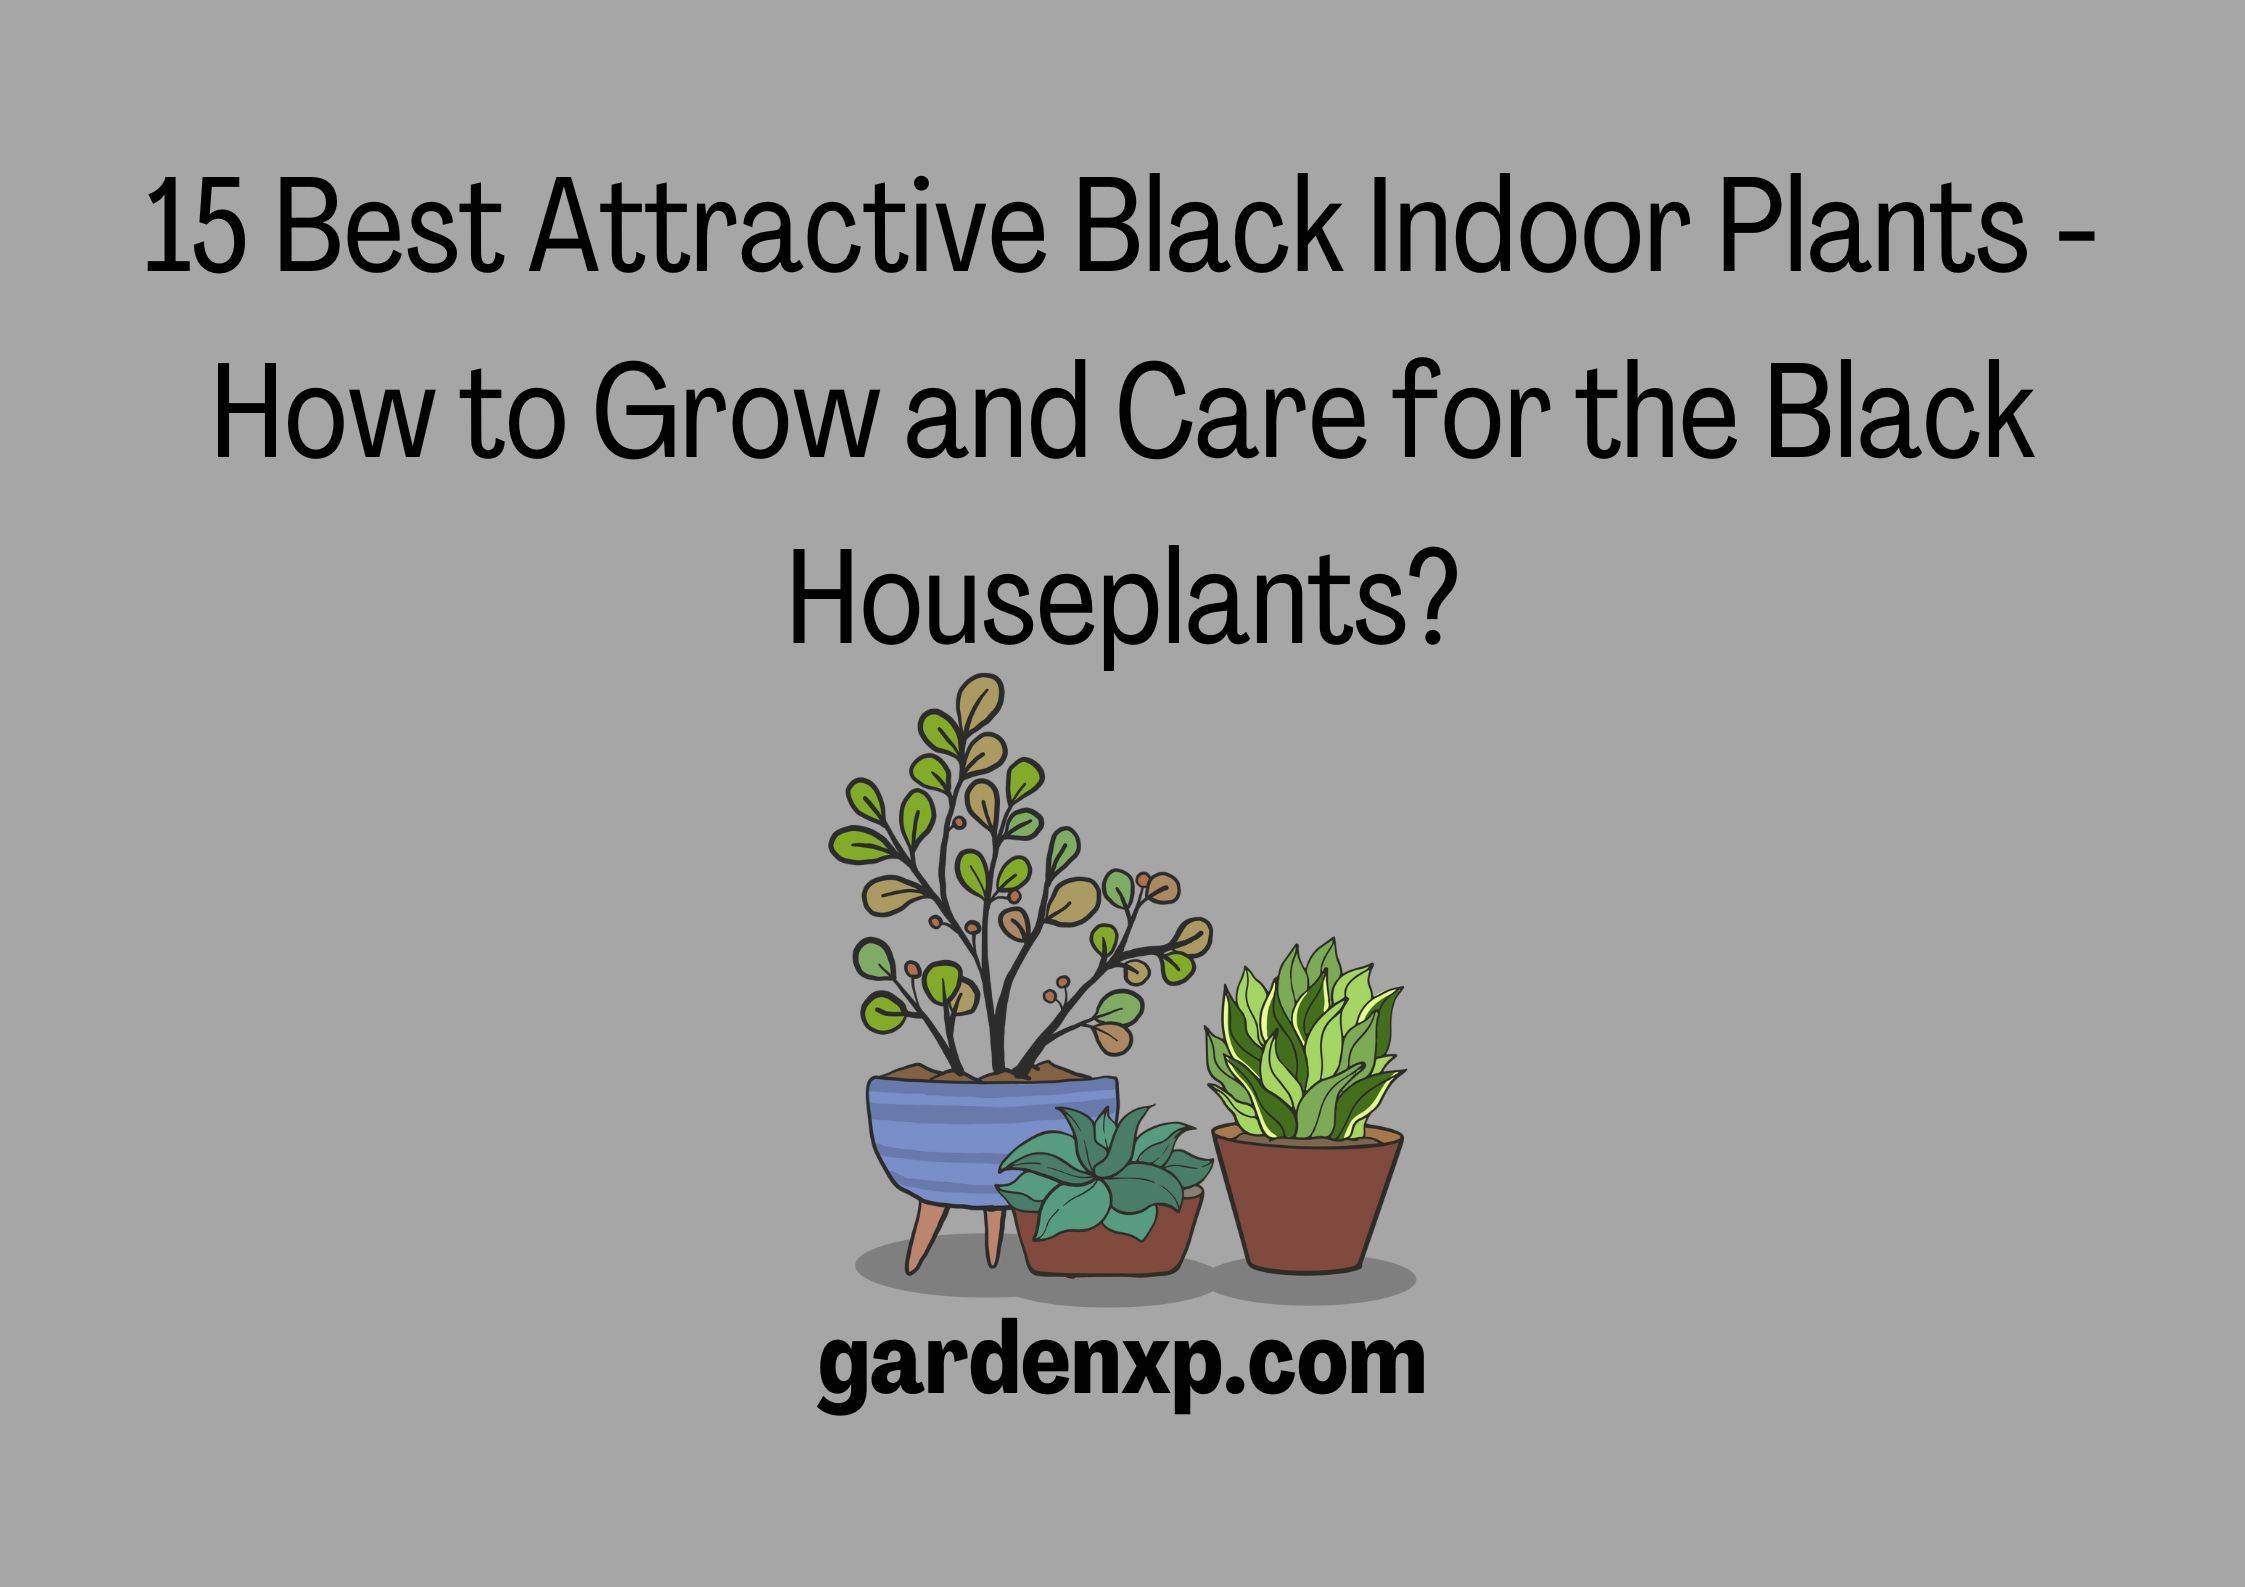 15 Best Attractive Black Indoor Plants - How to Grow and Care for the Black Houseplants?